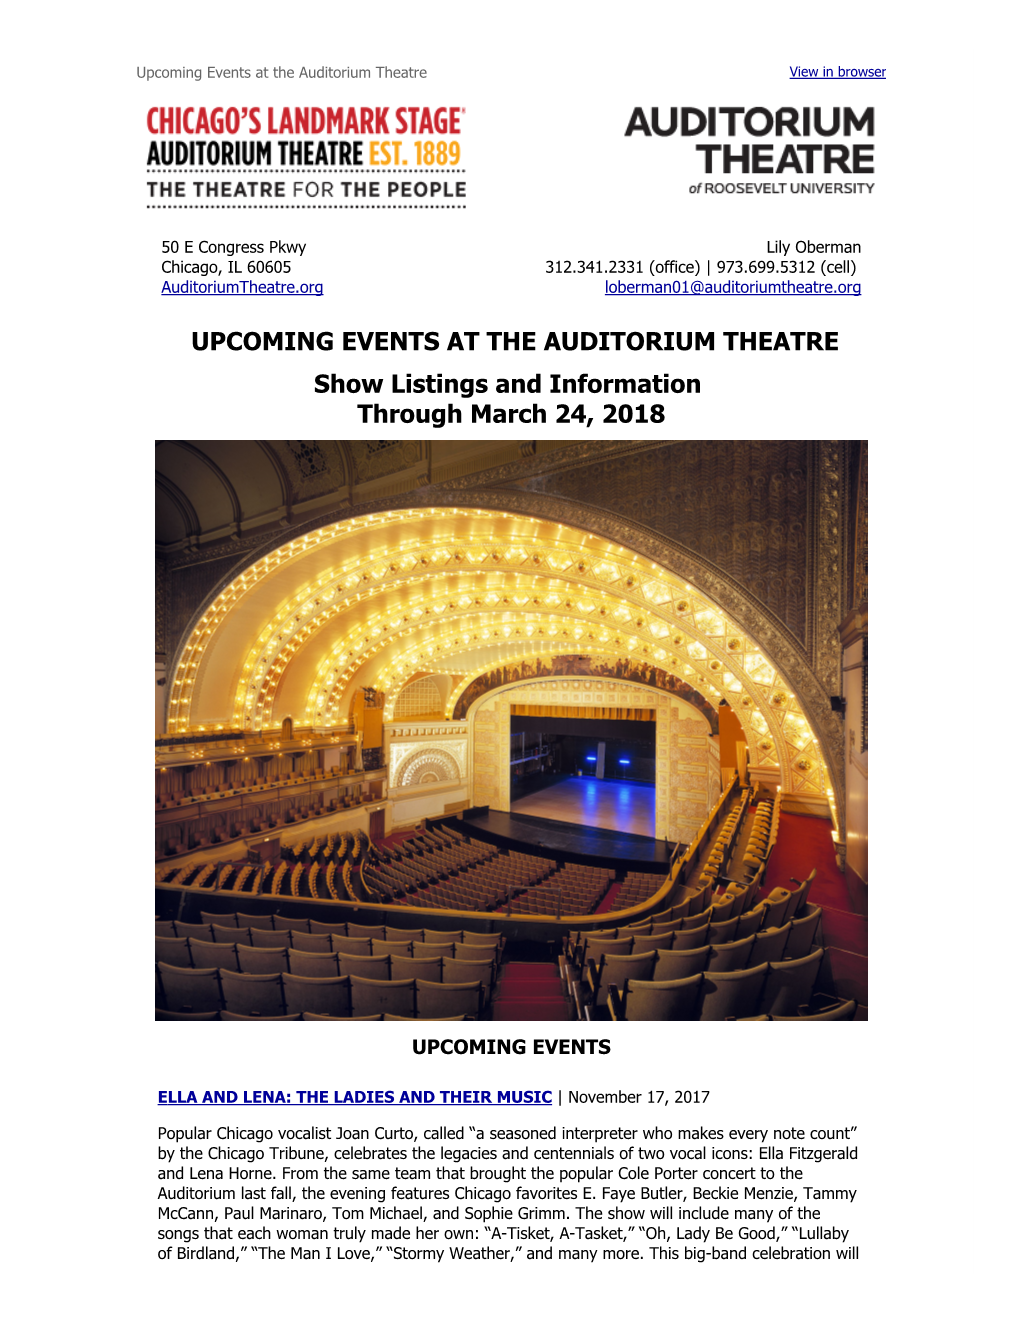 UPCOMING EVENTS at the AUDITORIUM THEATRE Show Listings and Information Through March 24, 2018